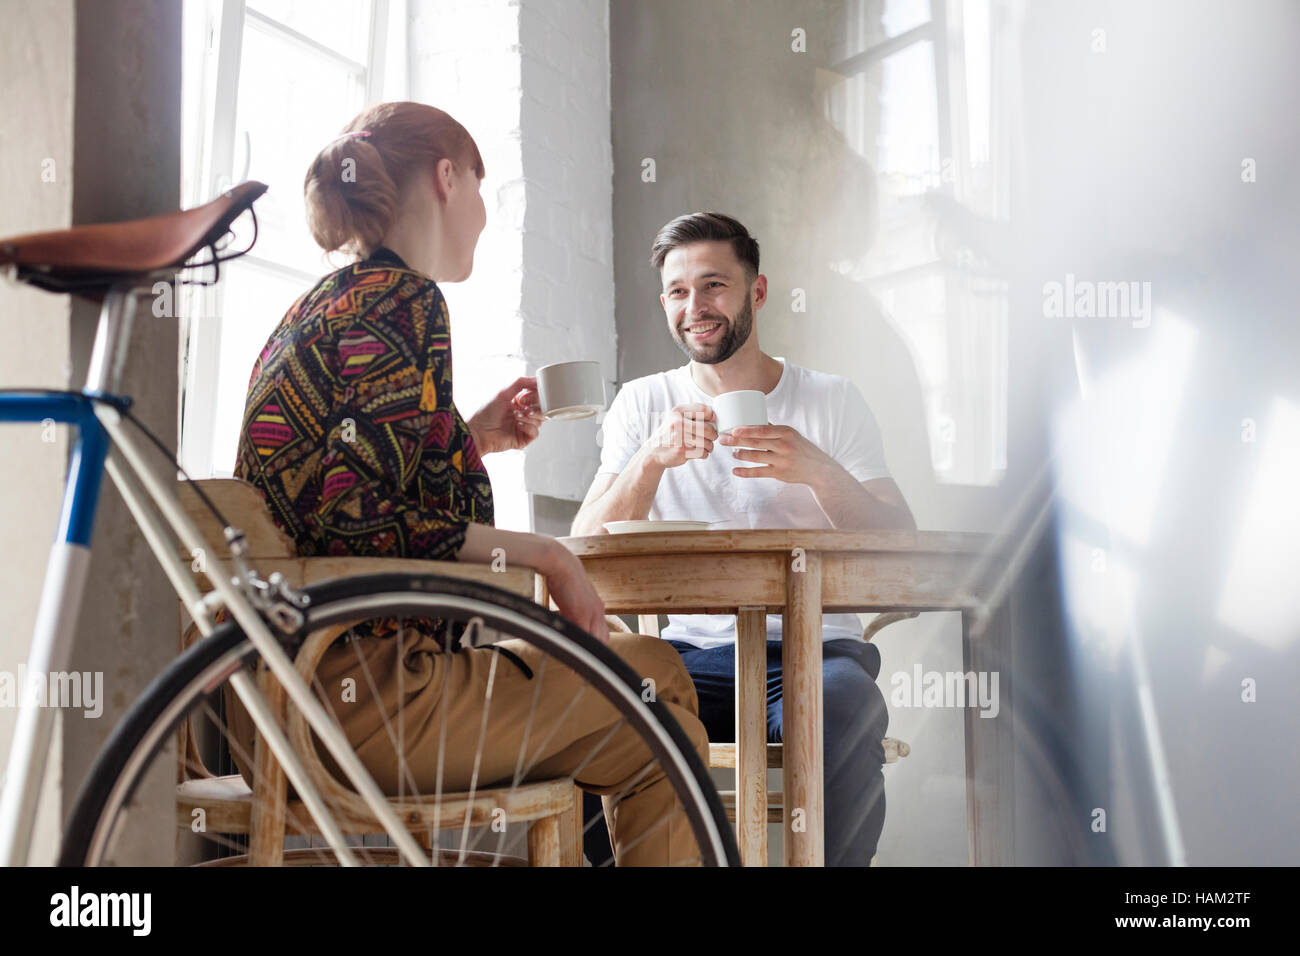 Couple talking and drinking coffee at table Stock Photo